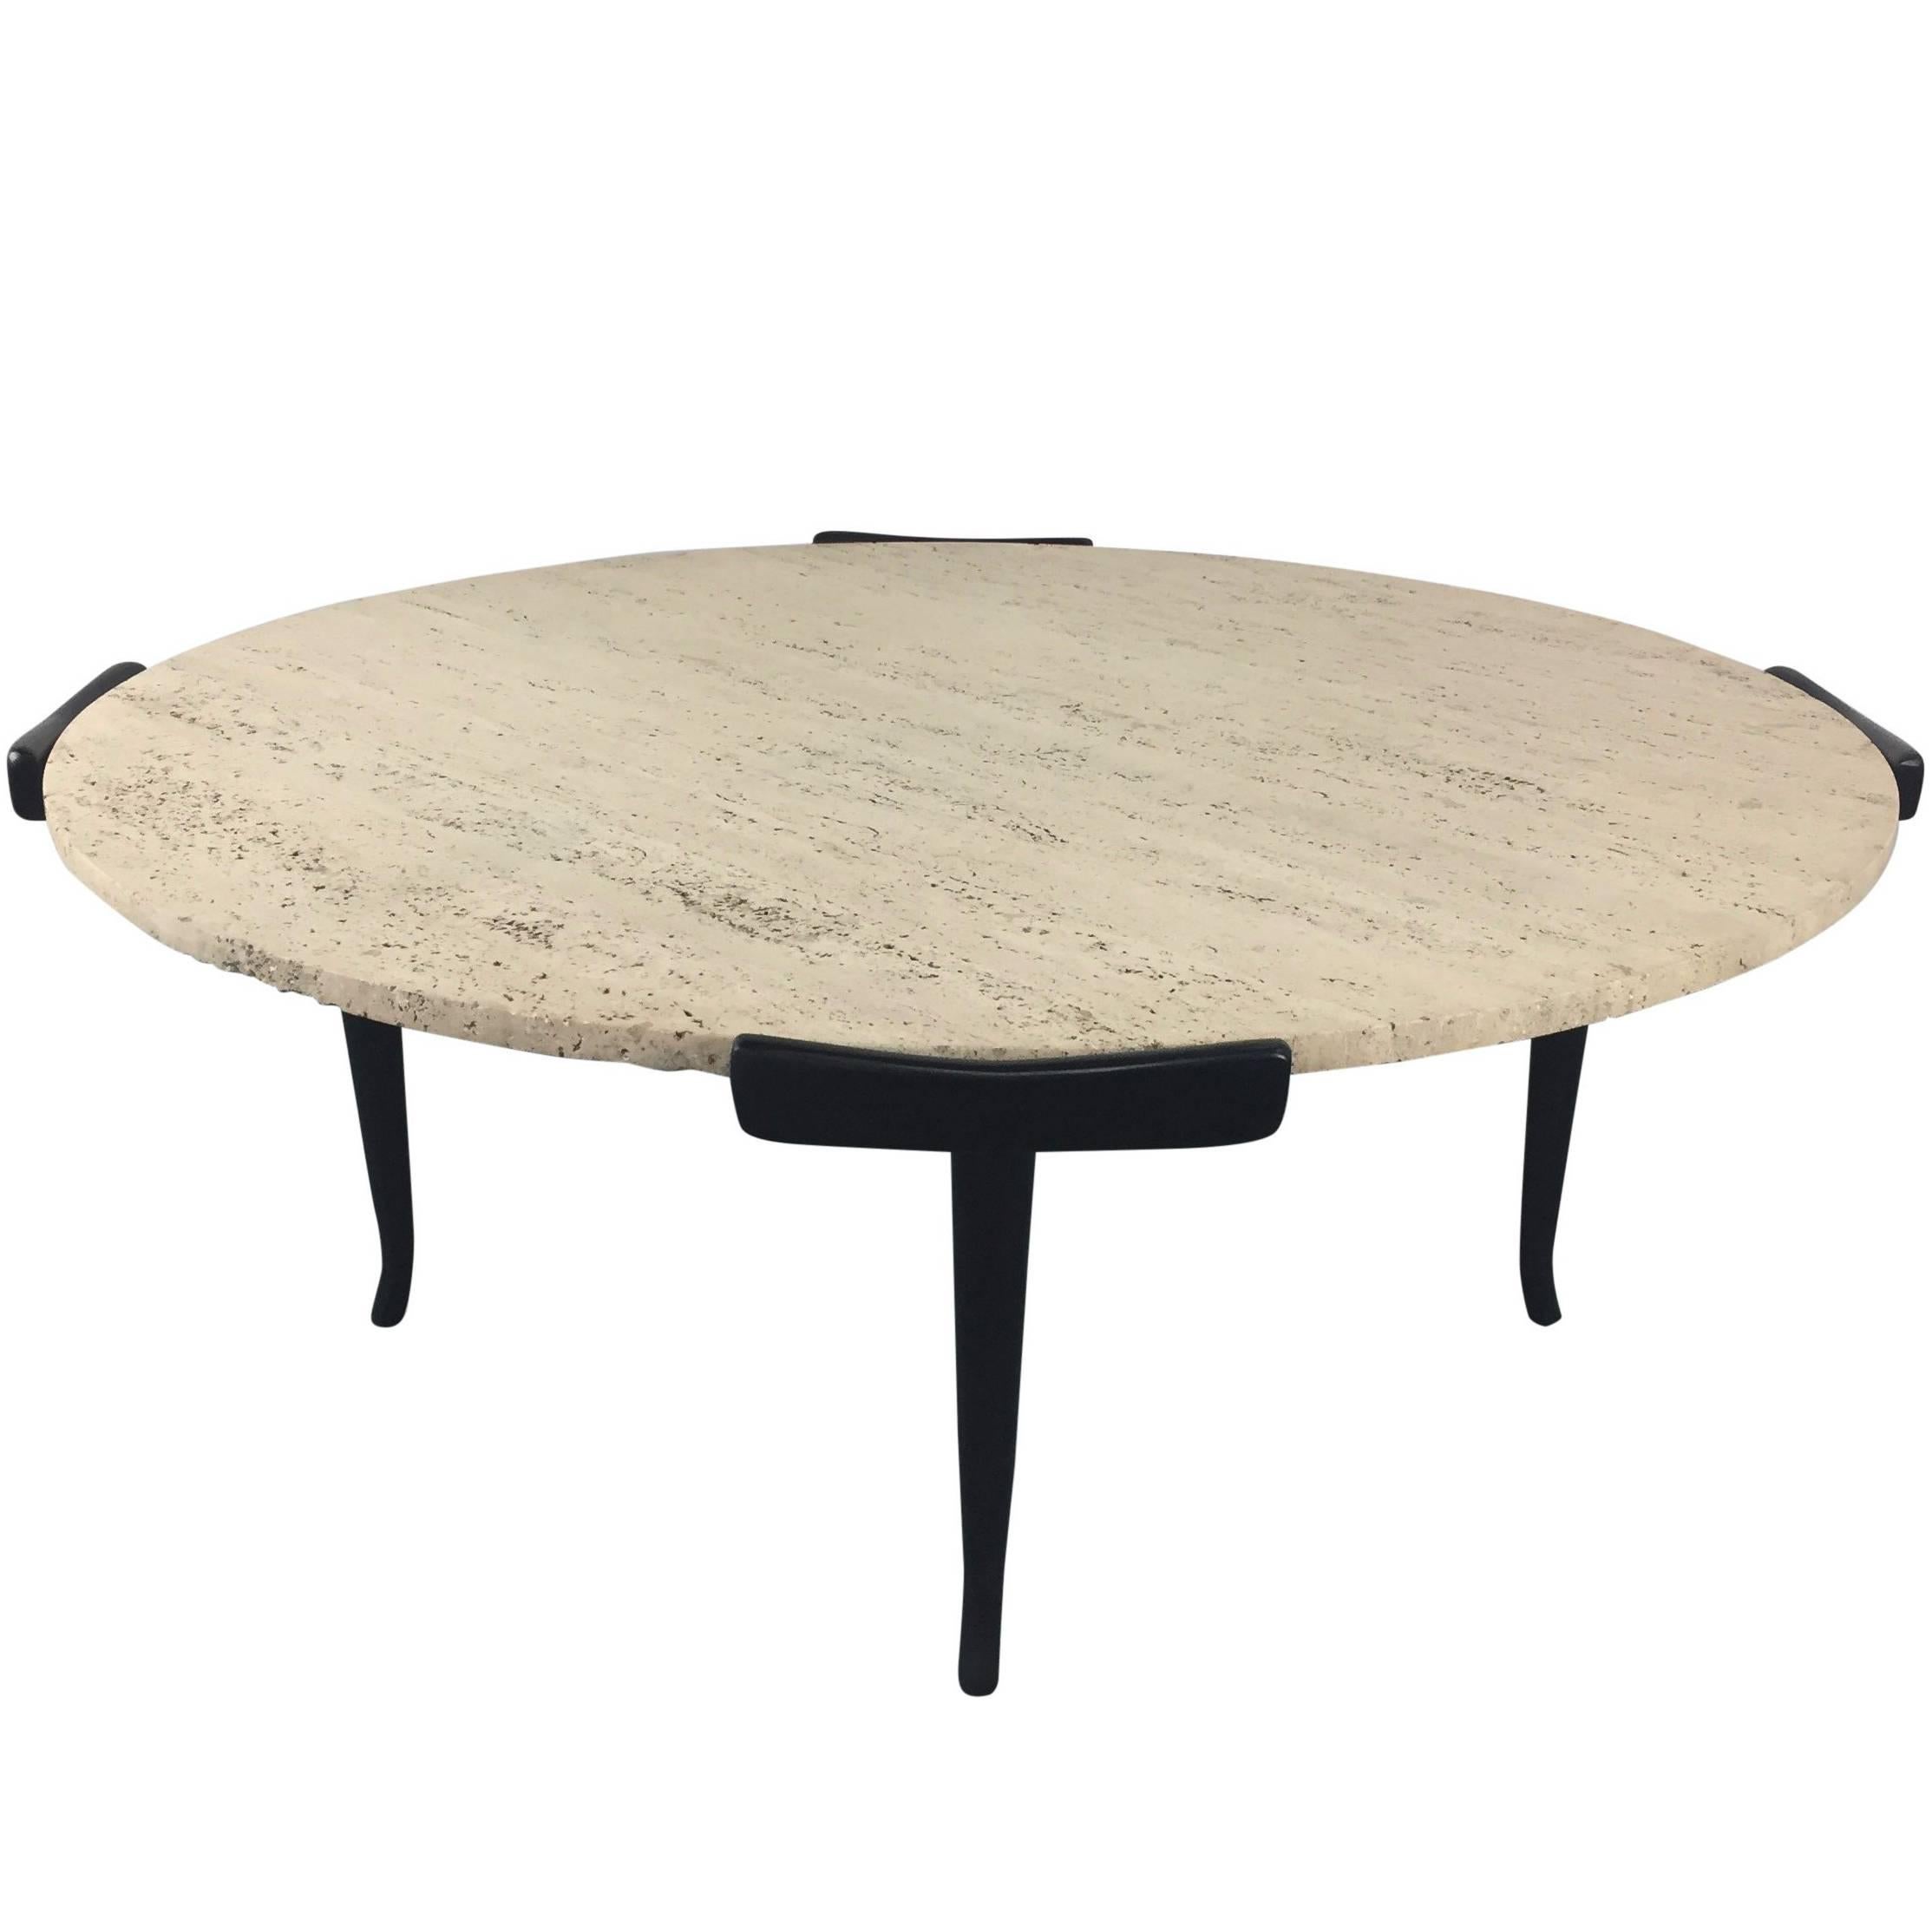 Italian Travertine and Ebonized Wood Coffee Table in the manner of Ico Parisi